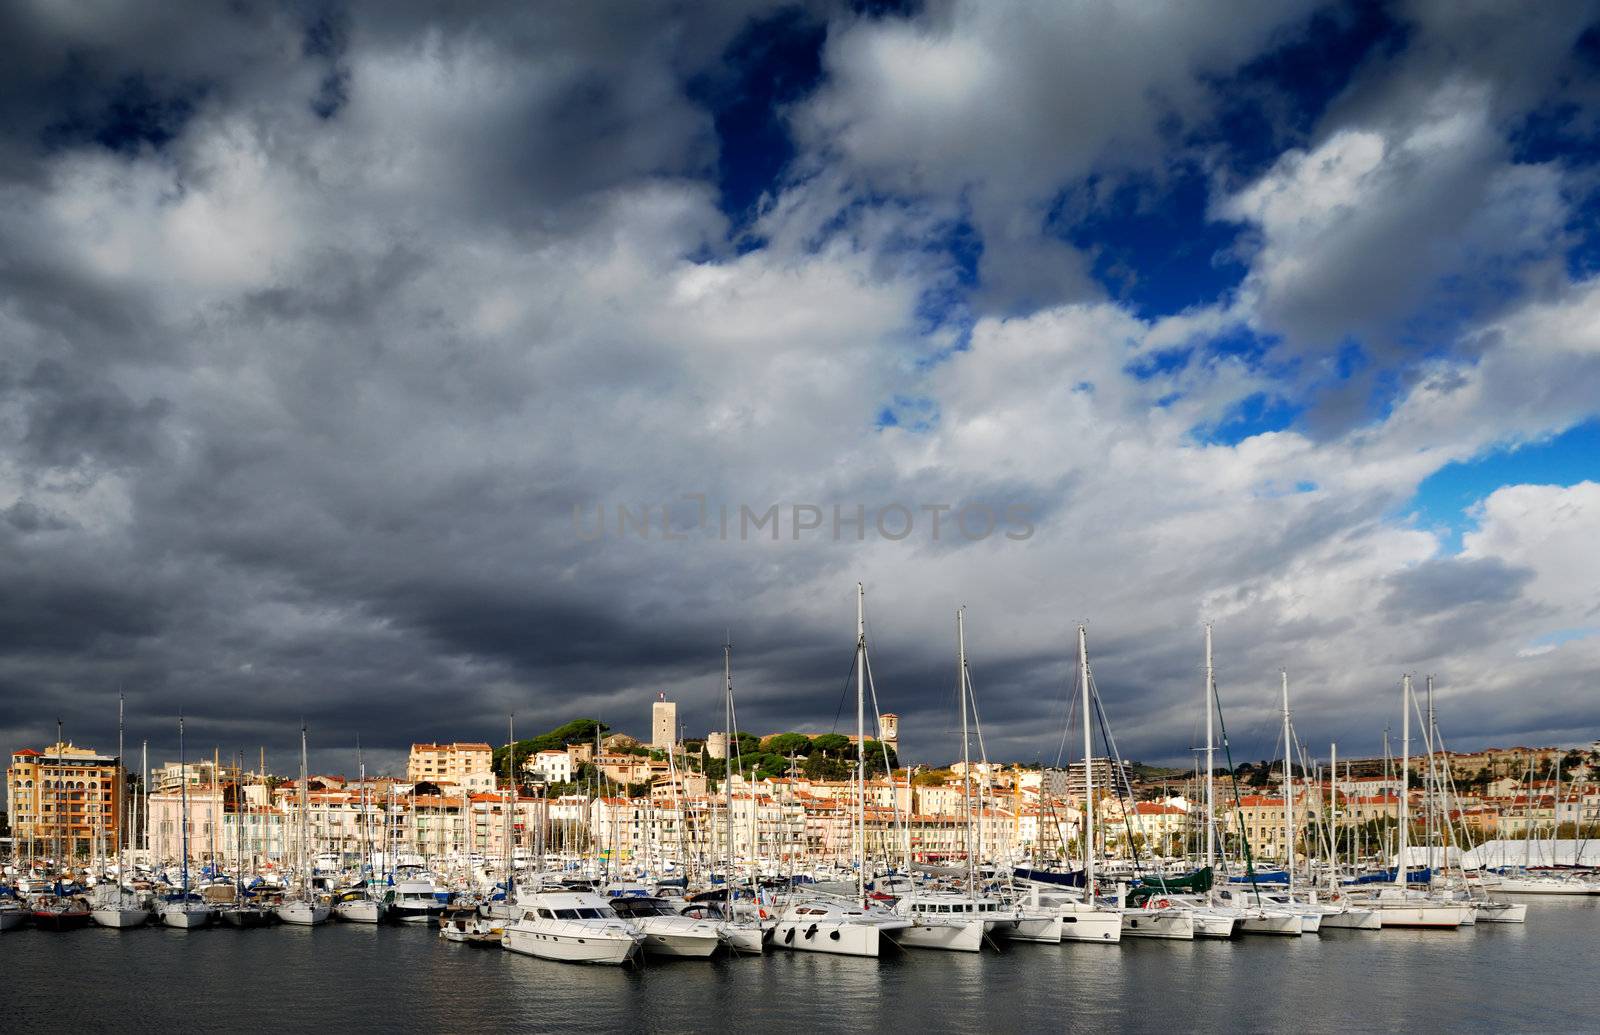 Images shows the Vieux Port (old port) in the city of Cannes, southern France, under a dramatic cloudy sky